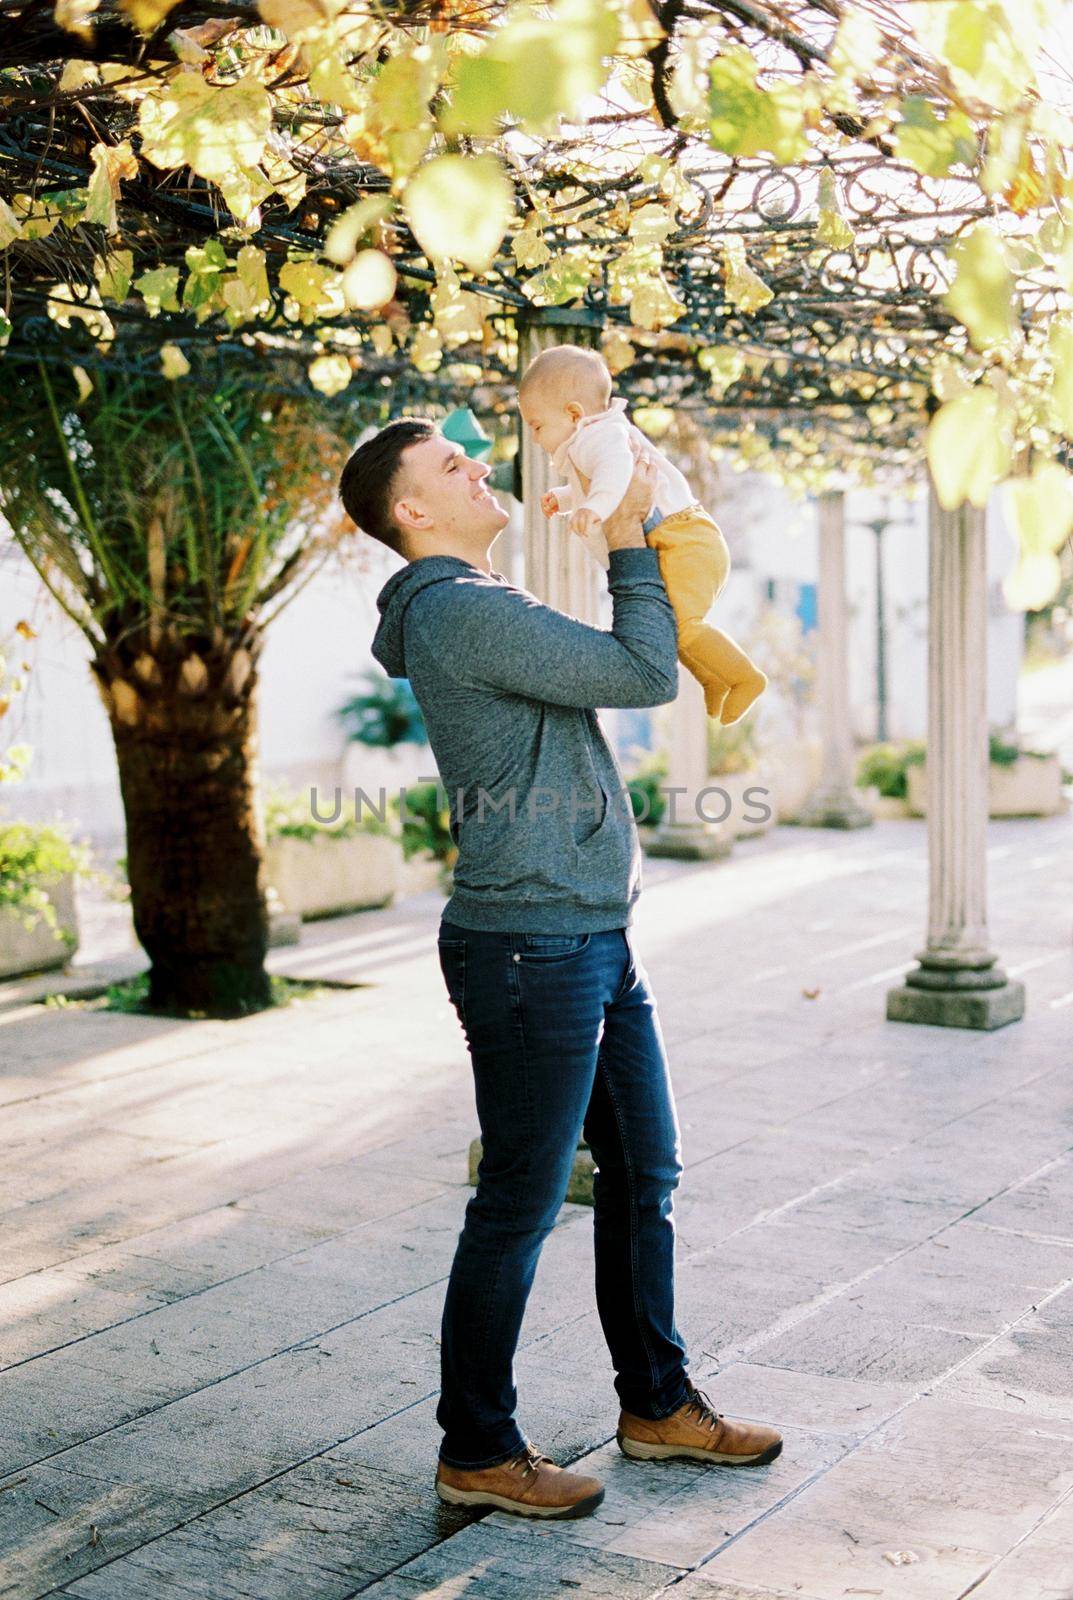 Dad raises a baby in his arms while standing in a pergola under the leaves by Nadtochiy